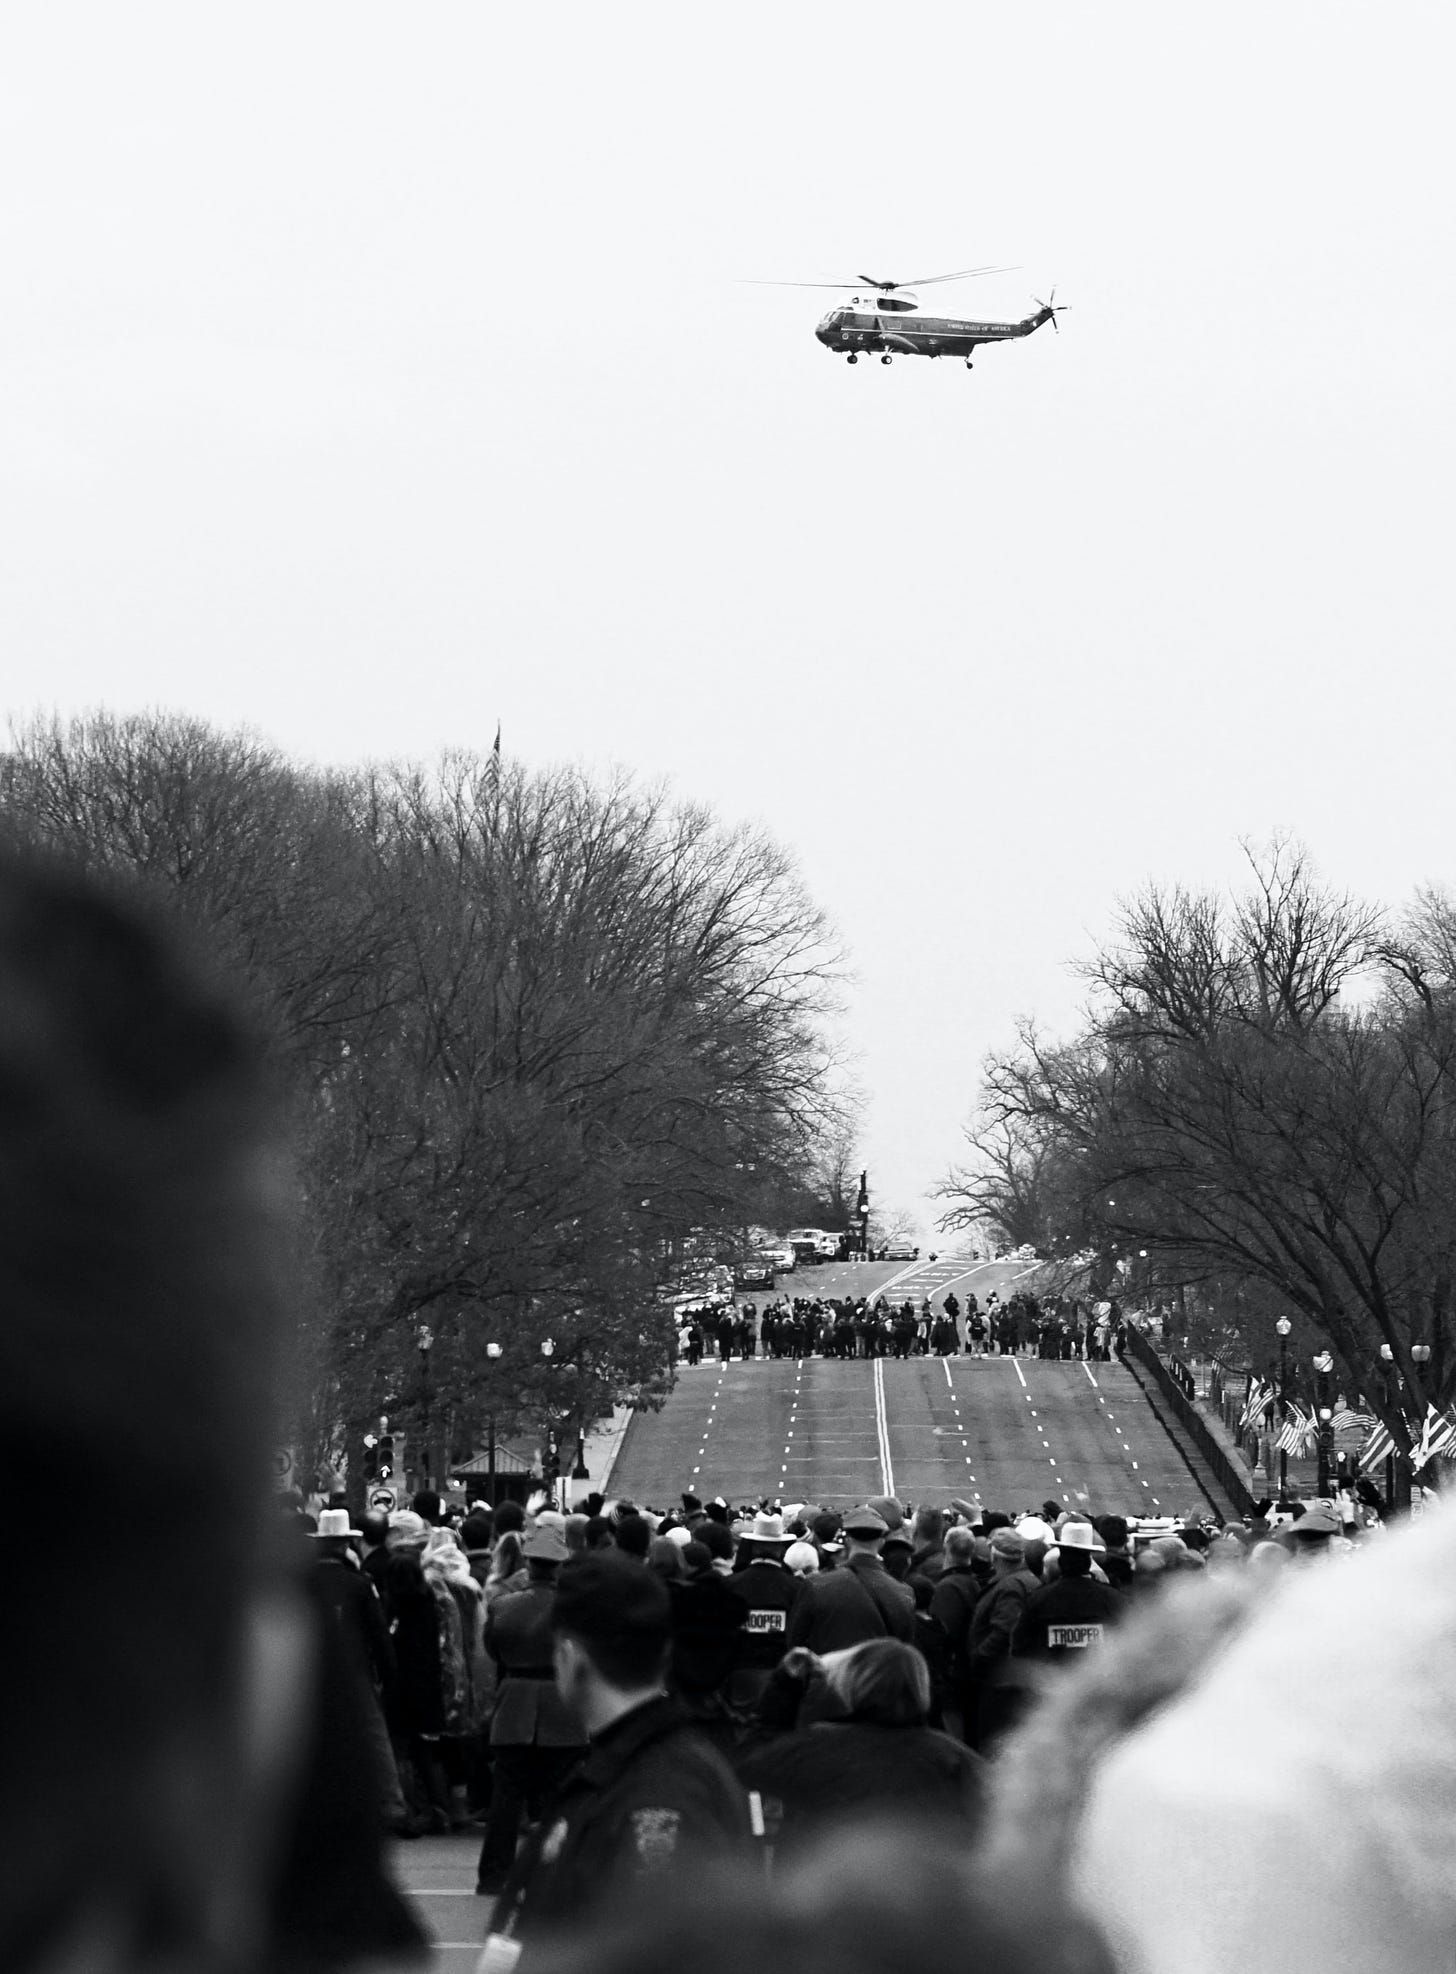 Photo of a government helicopter over the heads of people gathered in a street.